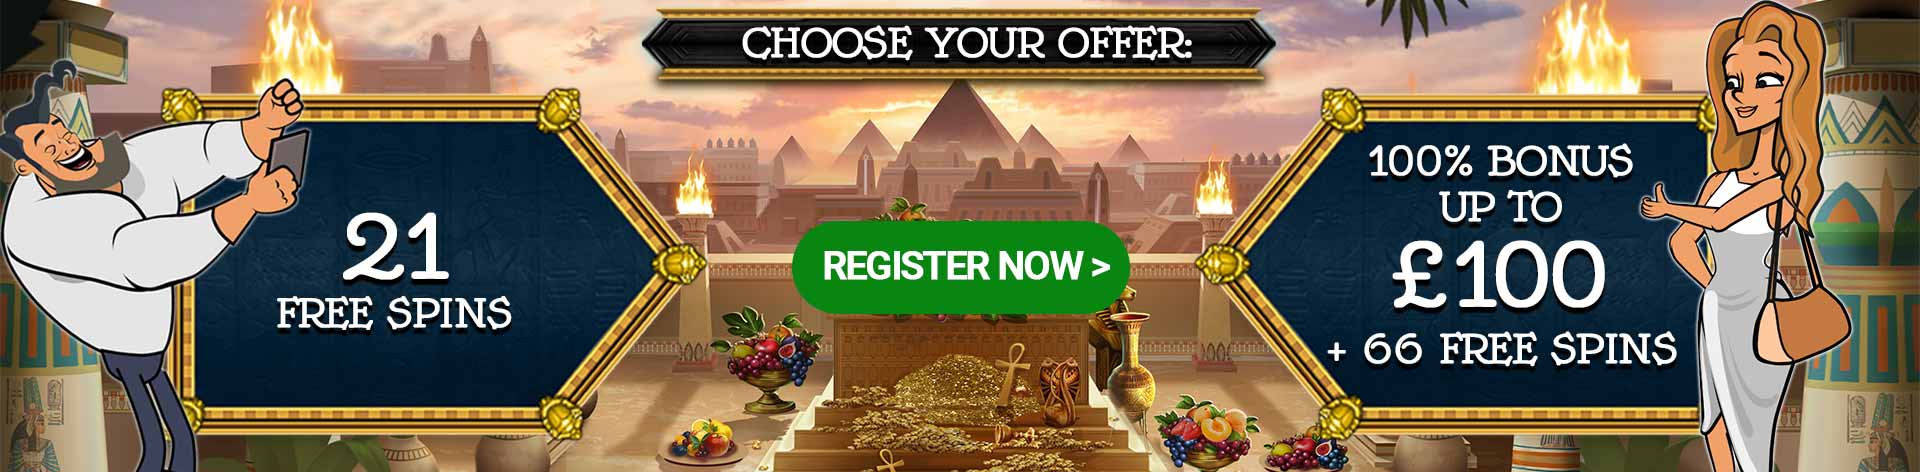 Choose your offer: 21 Free Spins or 100% Bonus up to £100 + 66 Free Spins